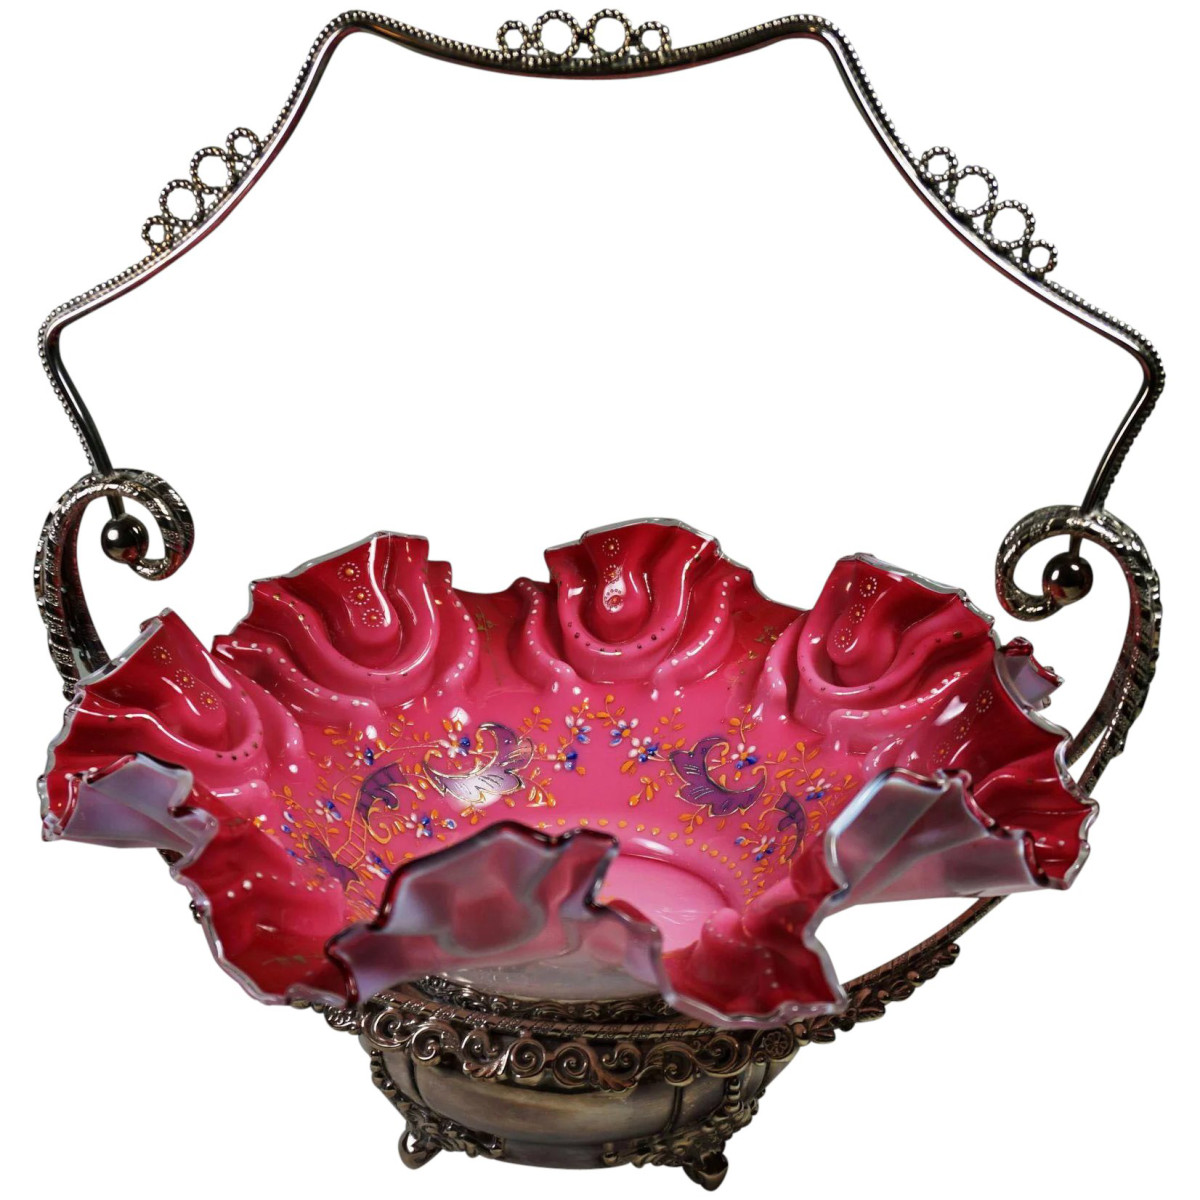 Victorian bride’s basket by Meriden Silver Plate Company, Meriden, Conn., cranberry and opal glass, circa 1880s, molded floral influenced decorating patterns around the bowl, embellished with hand-enameled Rococco designs and floral motifs; $645.